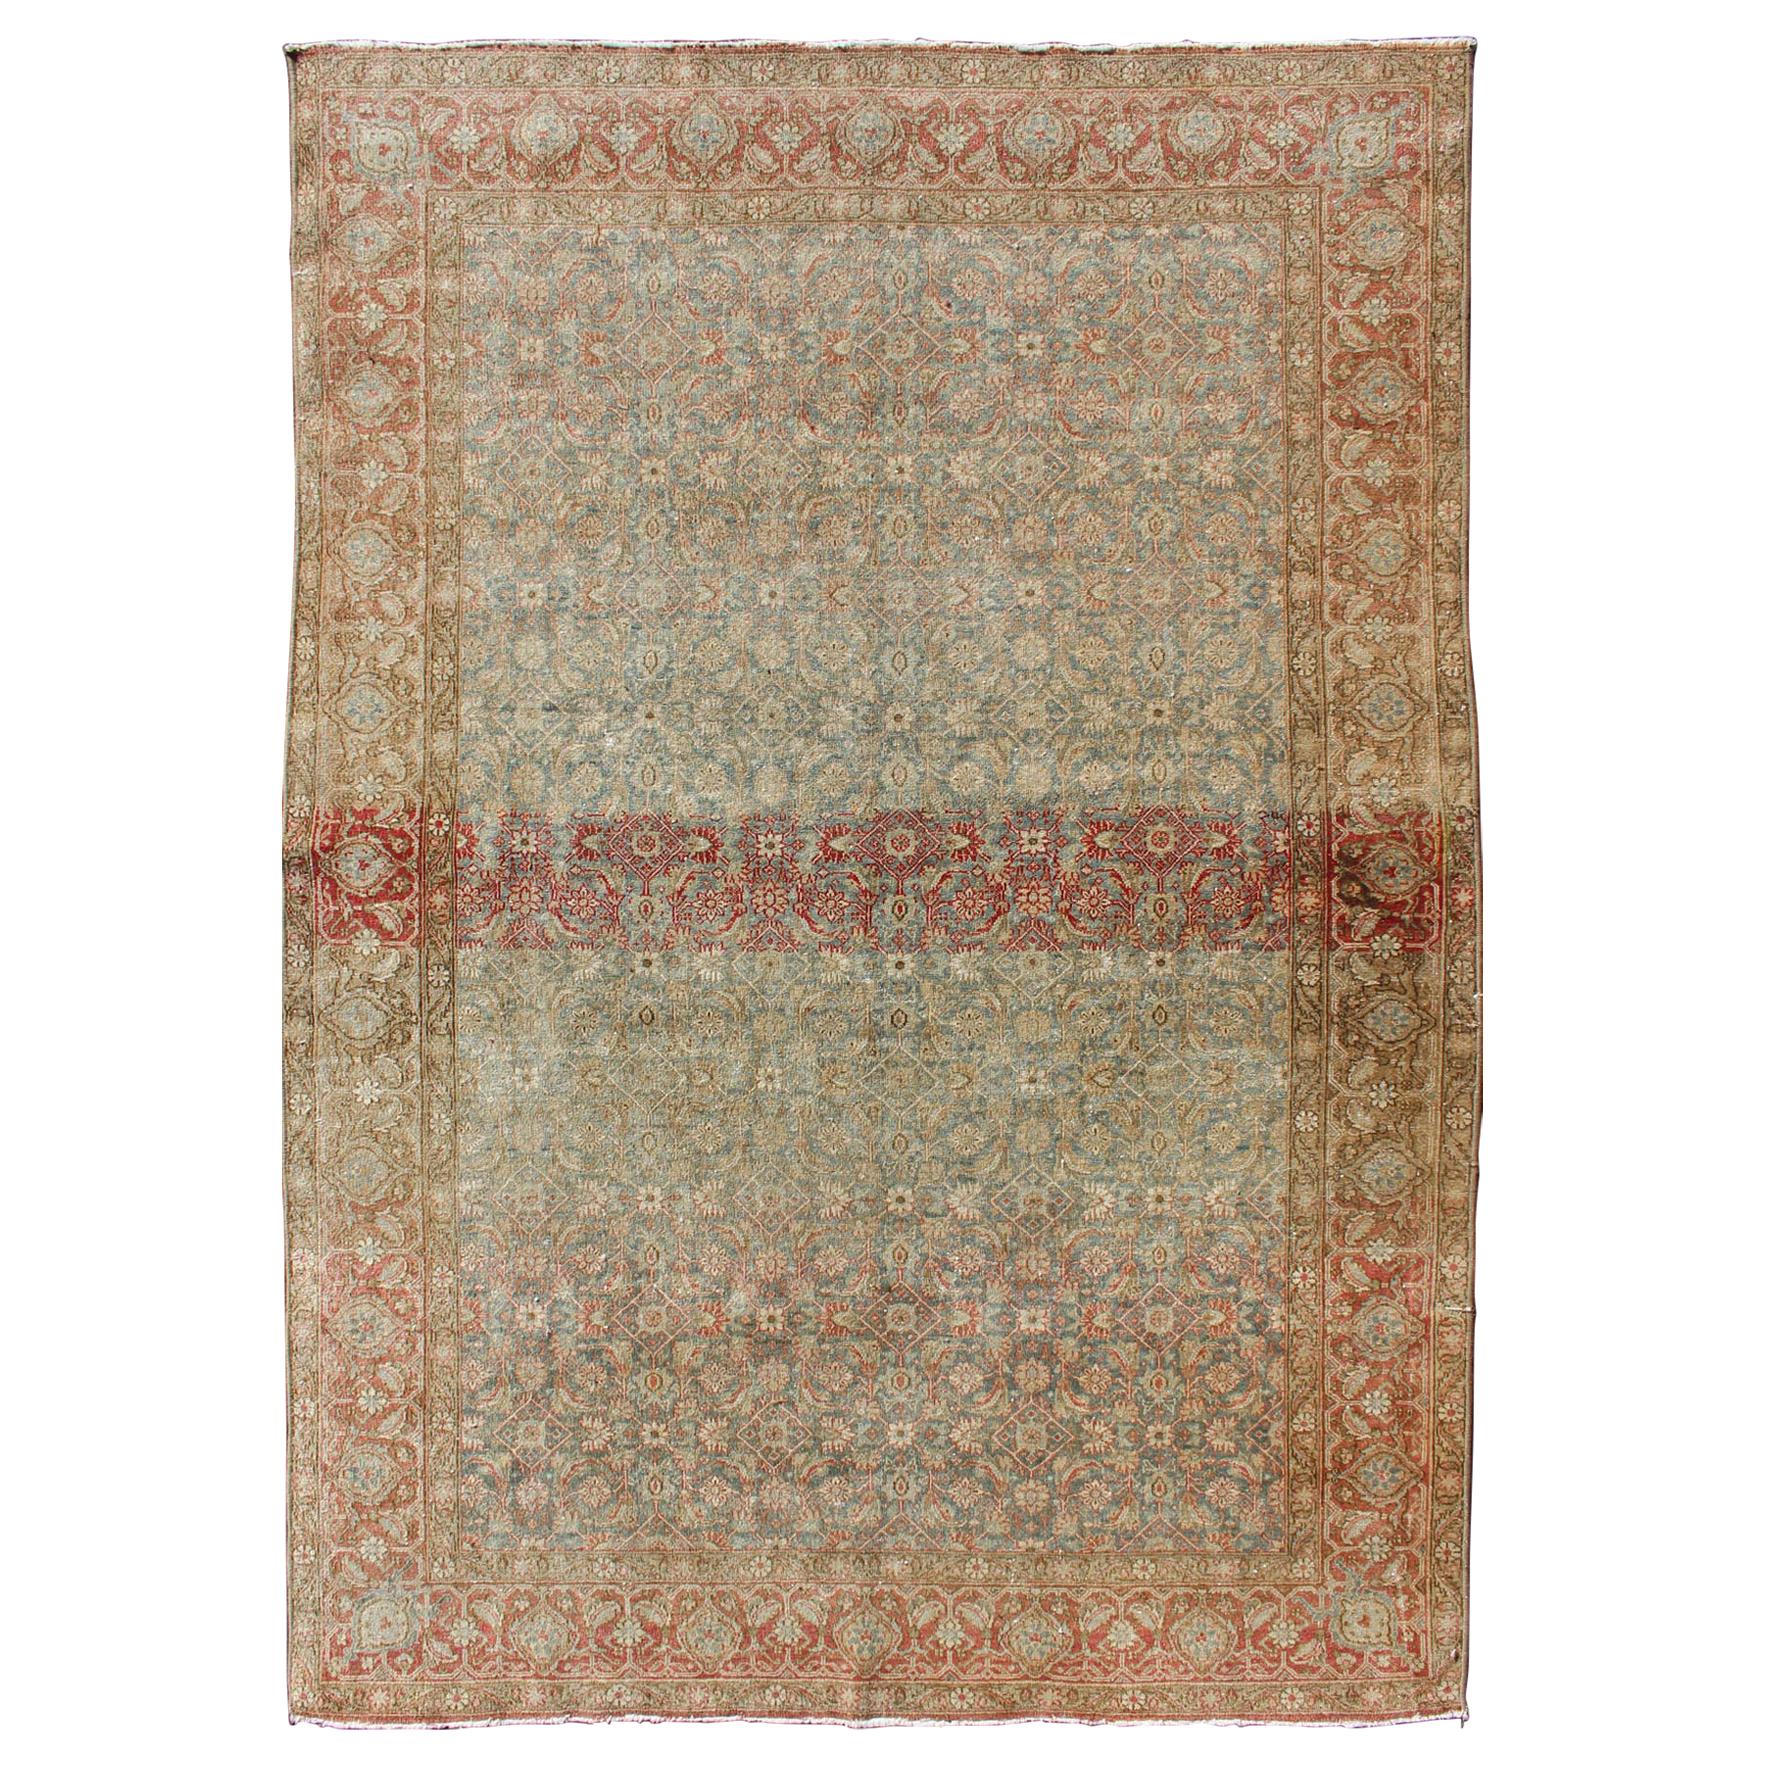 Antique Persian Tabriz Rug in Gray and Coral-Red